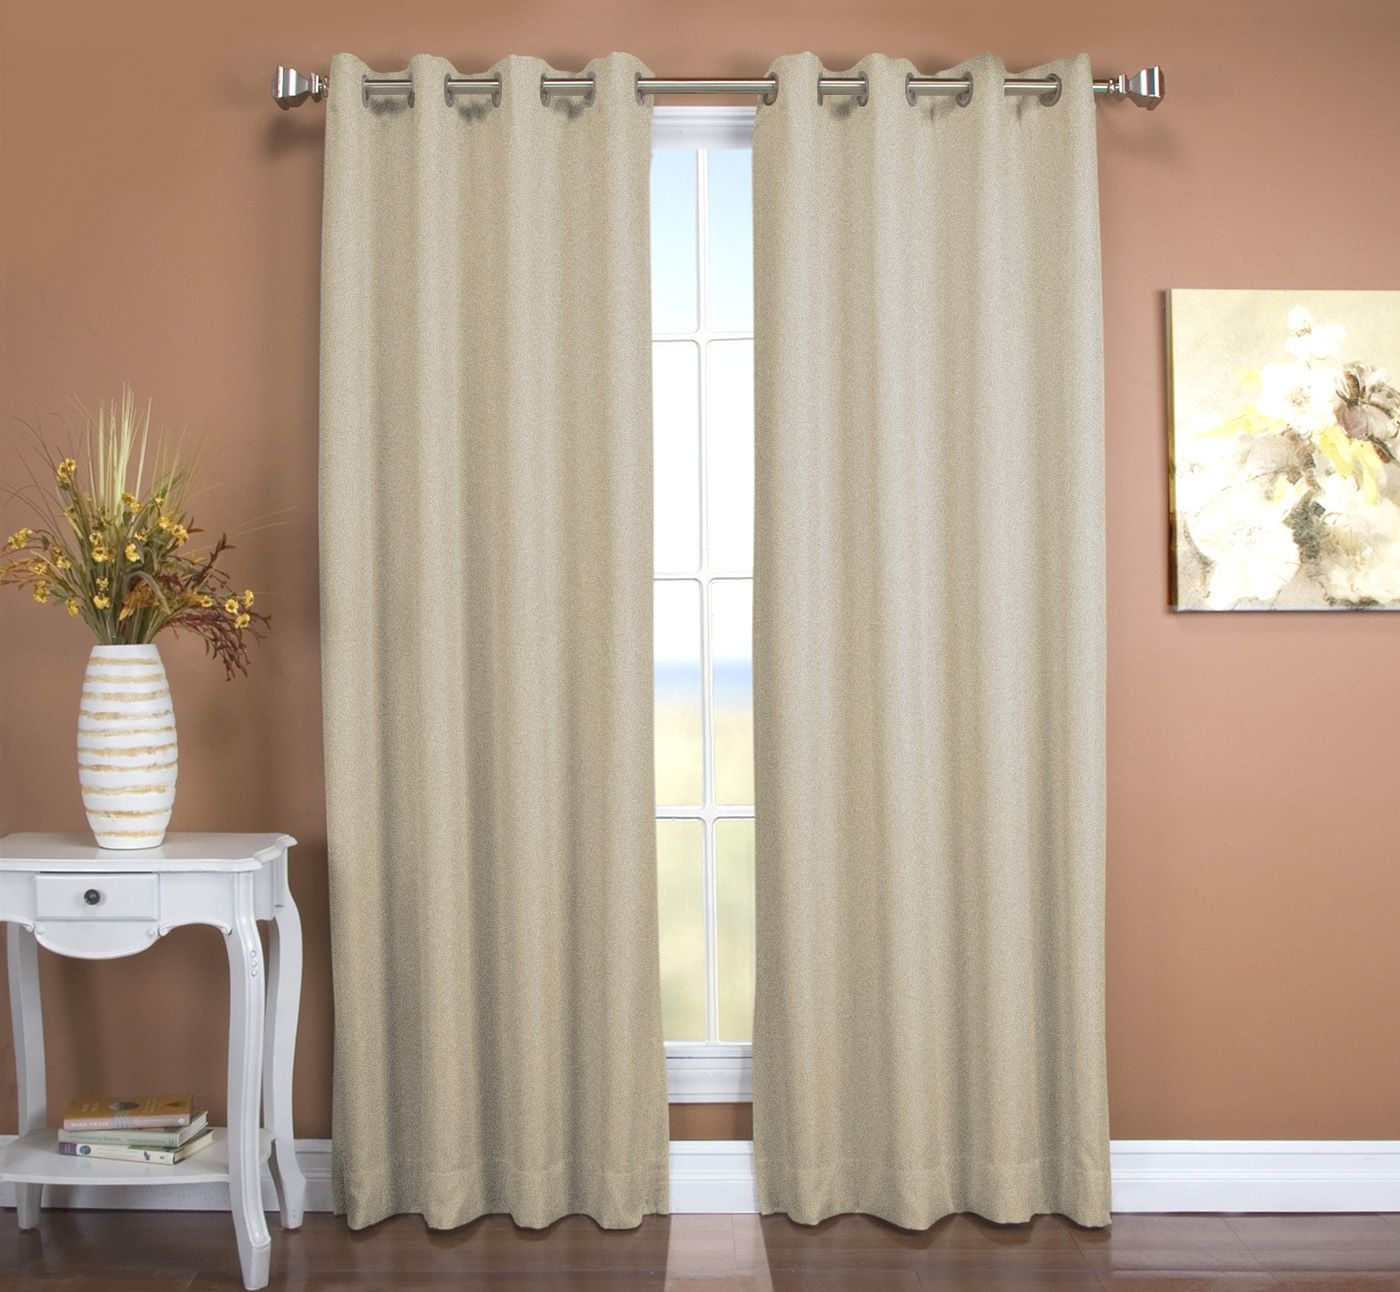 Indoor Outdoor Grommet Top Curtains And Panels Thecurtainshop Inside Double Lined Curtains (View 9 of 15)